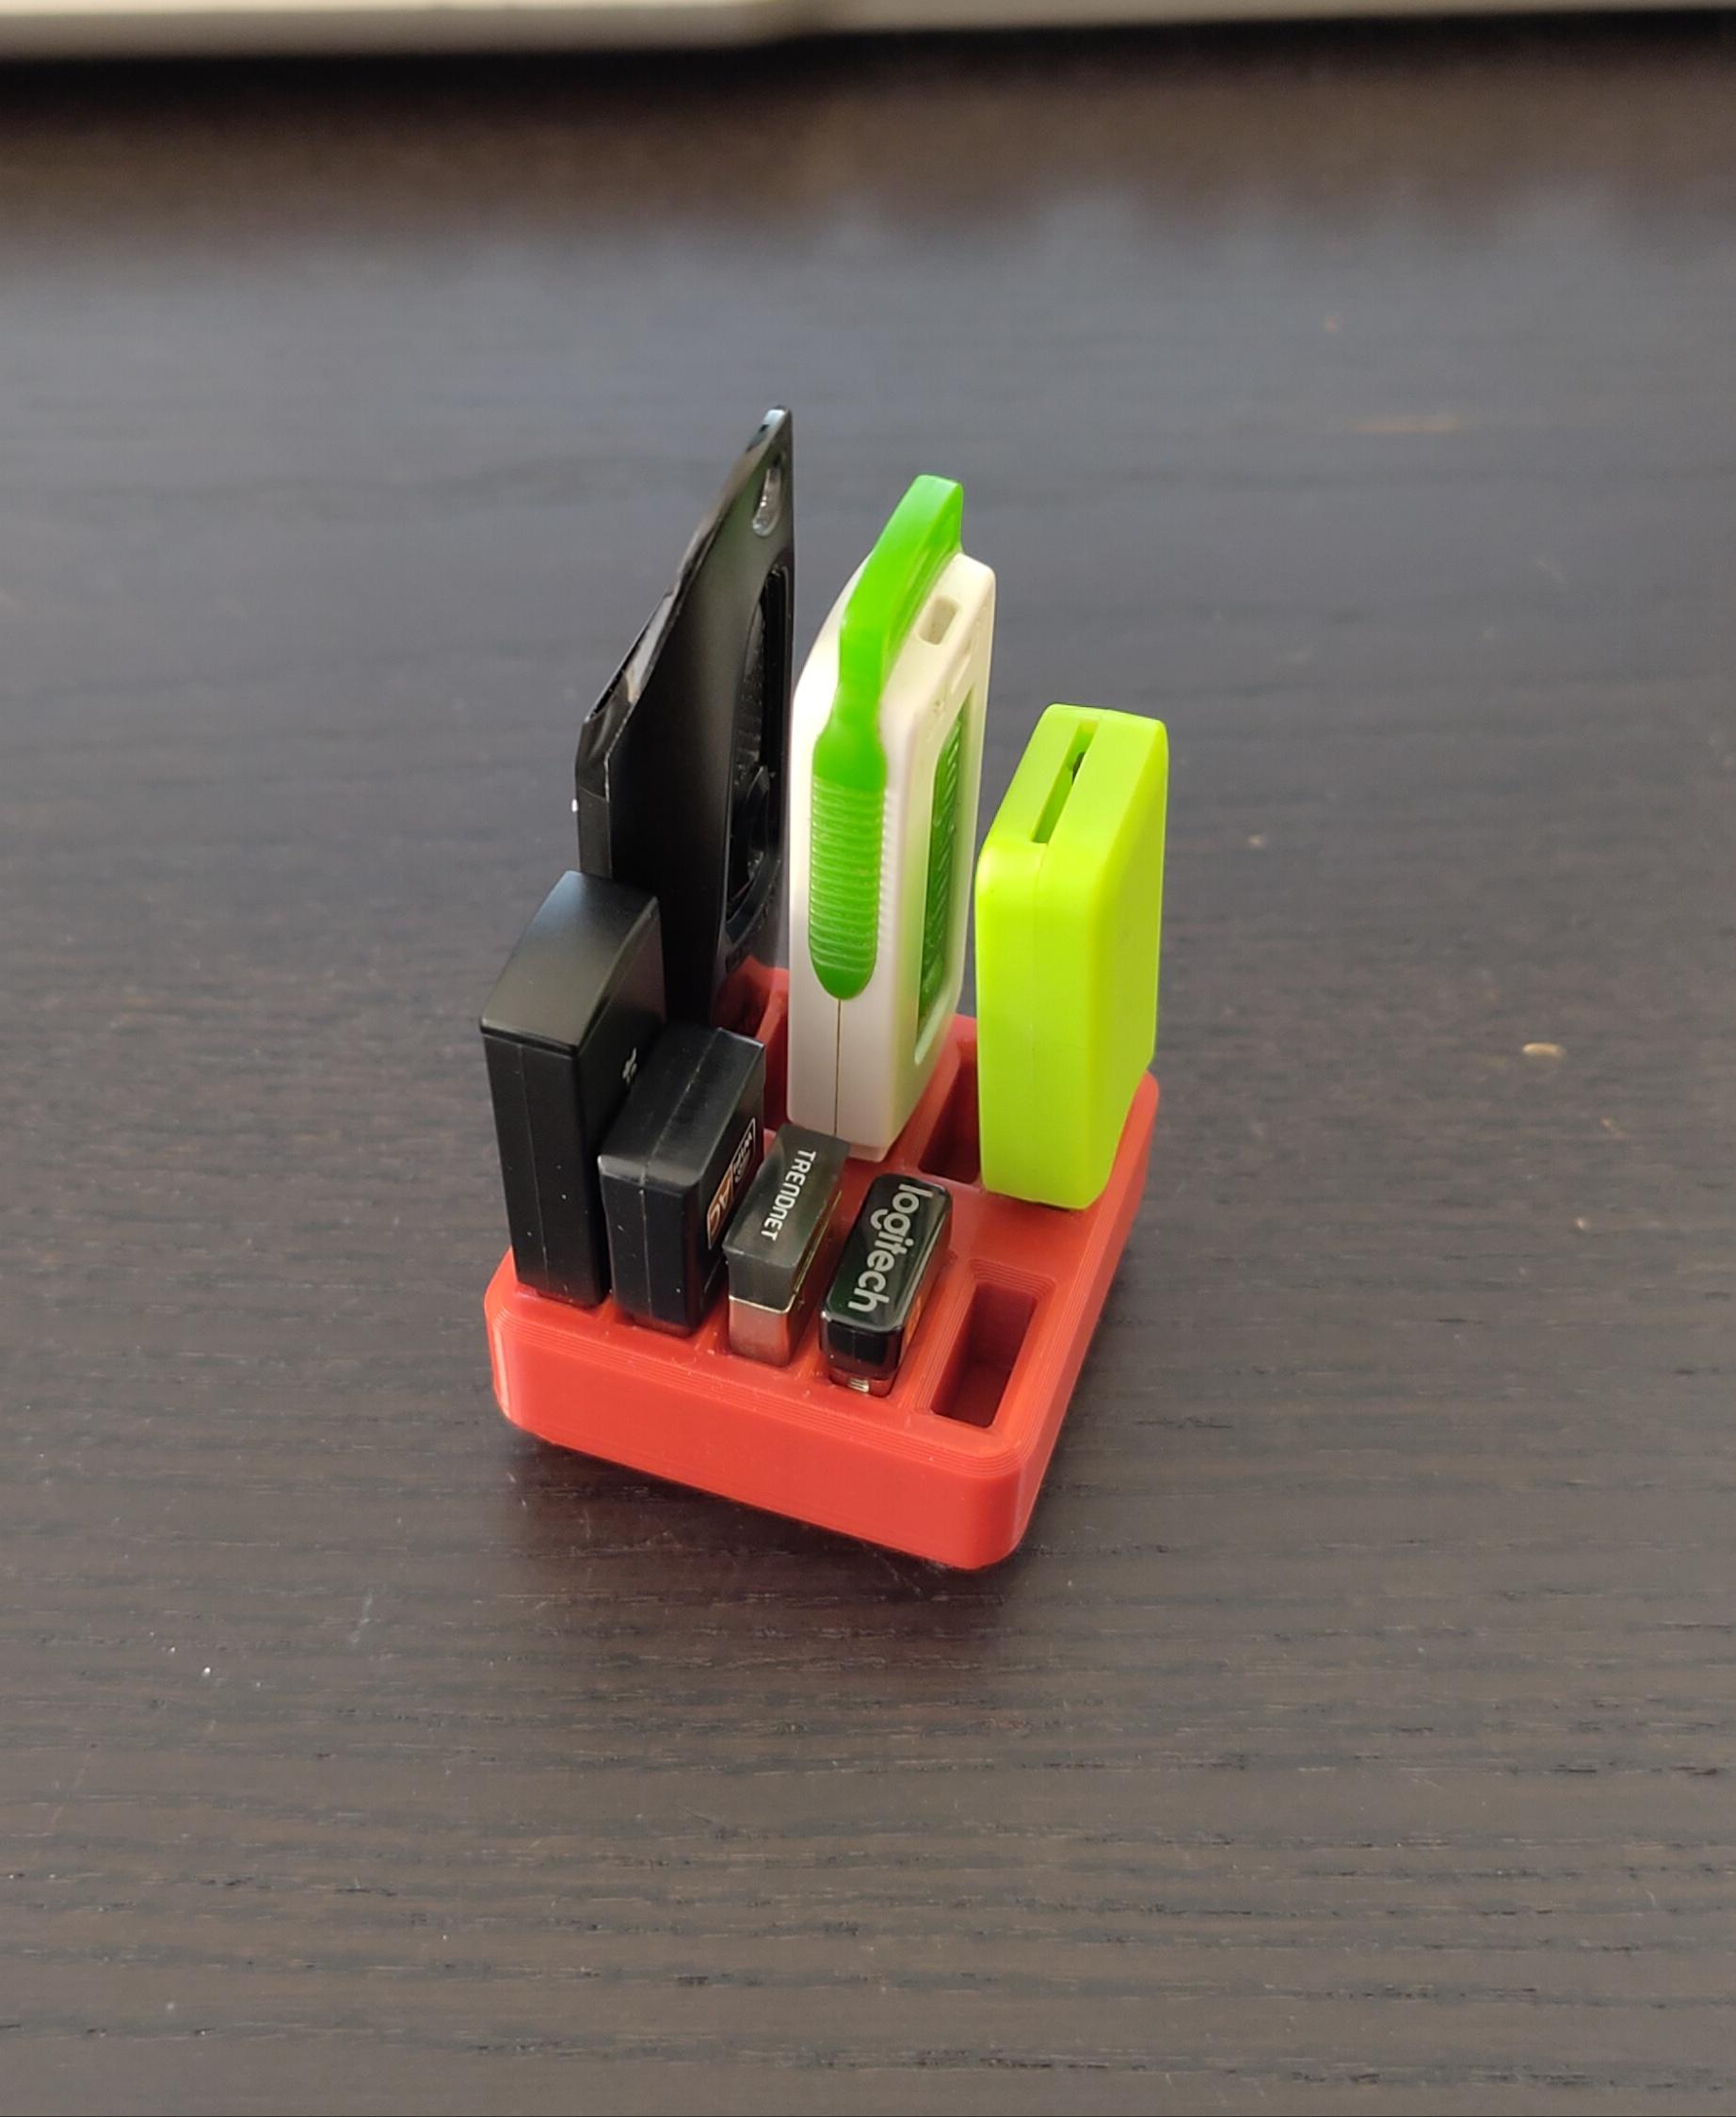 Gridfinity 1x1 USB Device Holder for 10 Small devices - 3 medium size sticks in the back row - 3d model